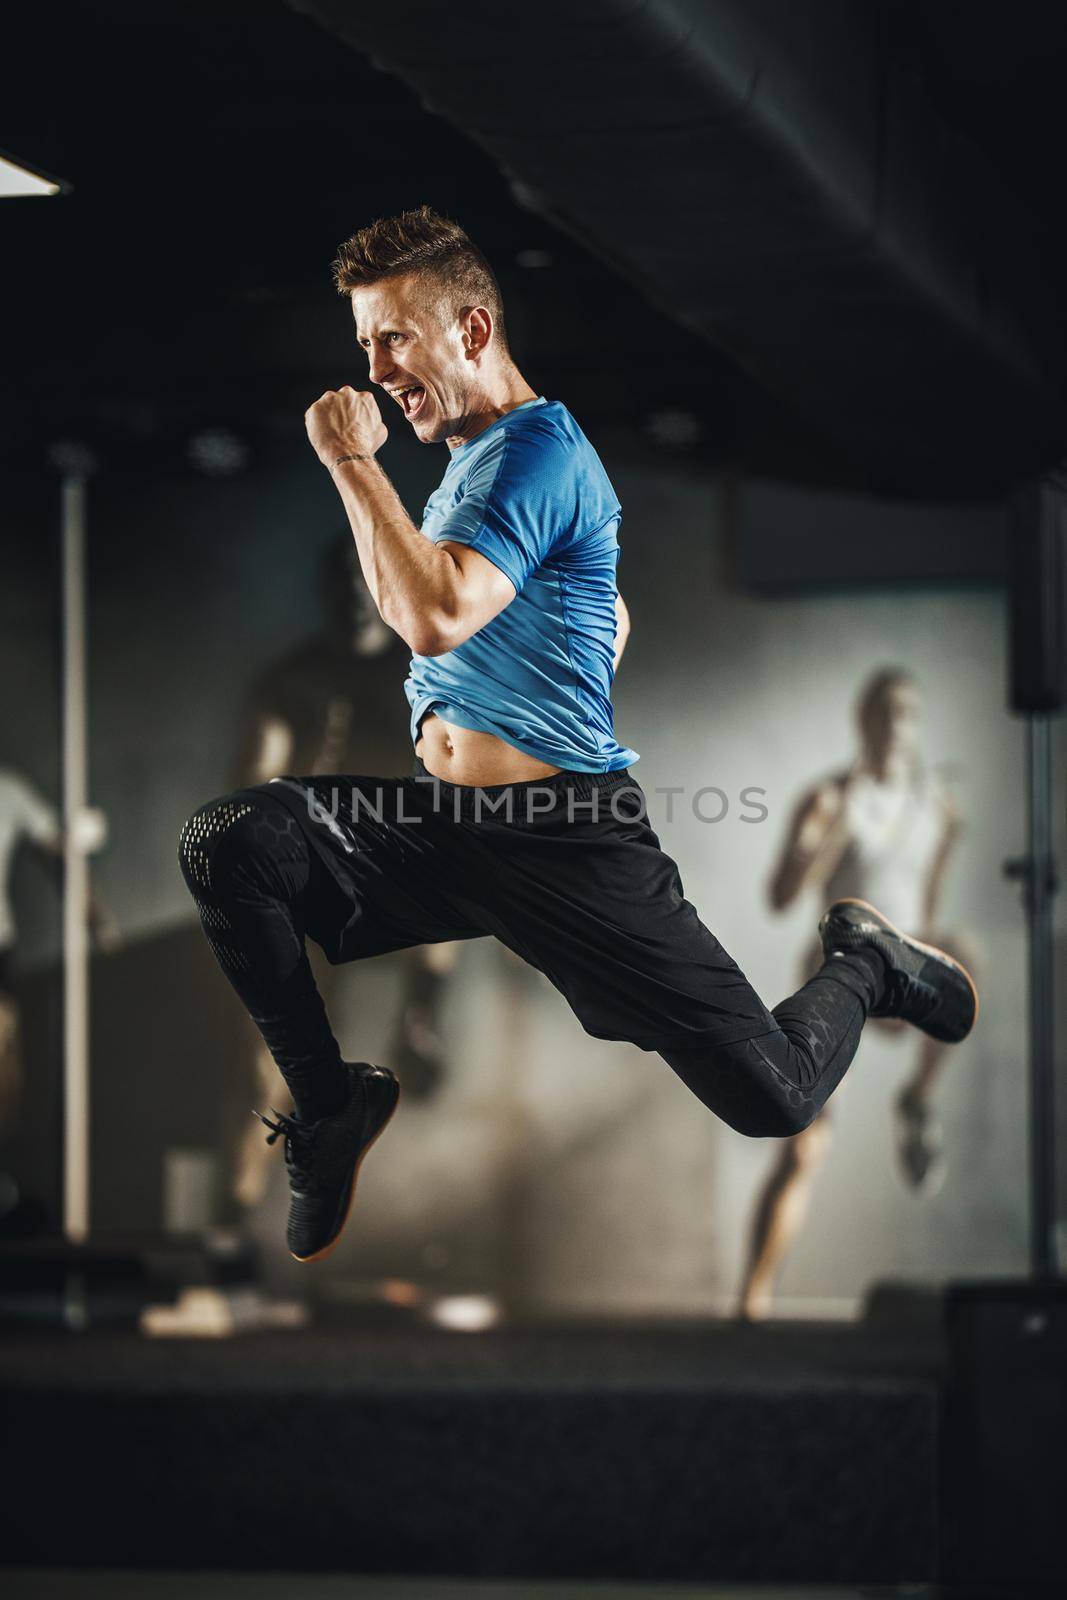 Shot of a handsome muscular guy in sportswear jumping mid air during working out at the gym.